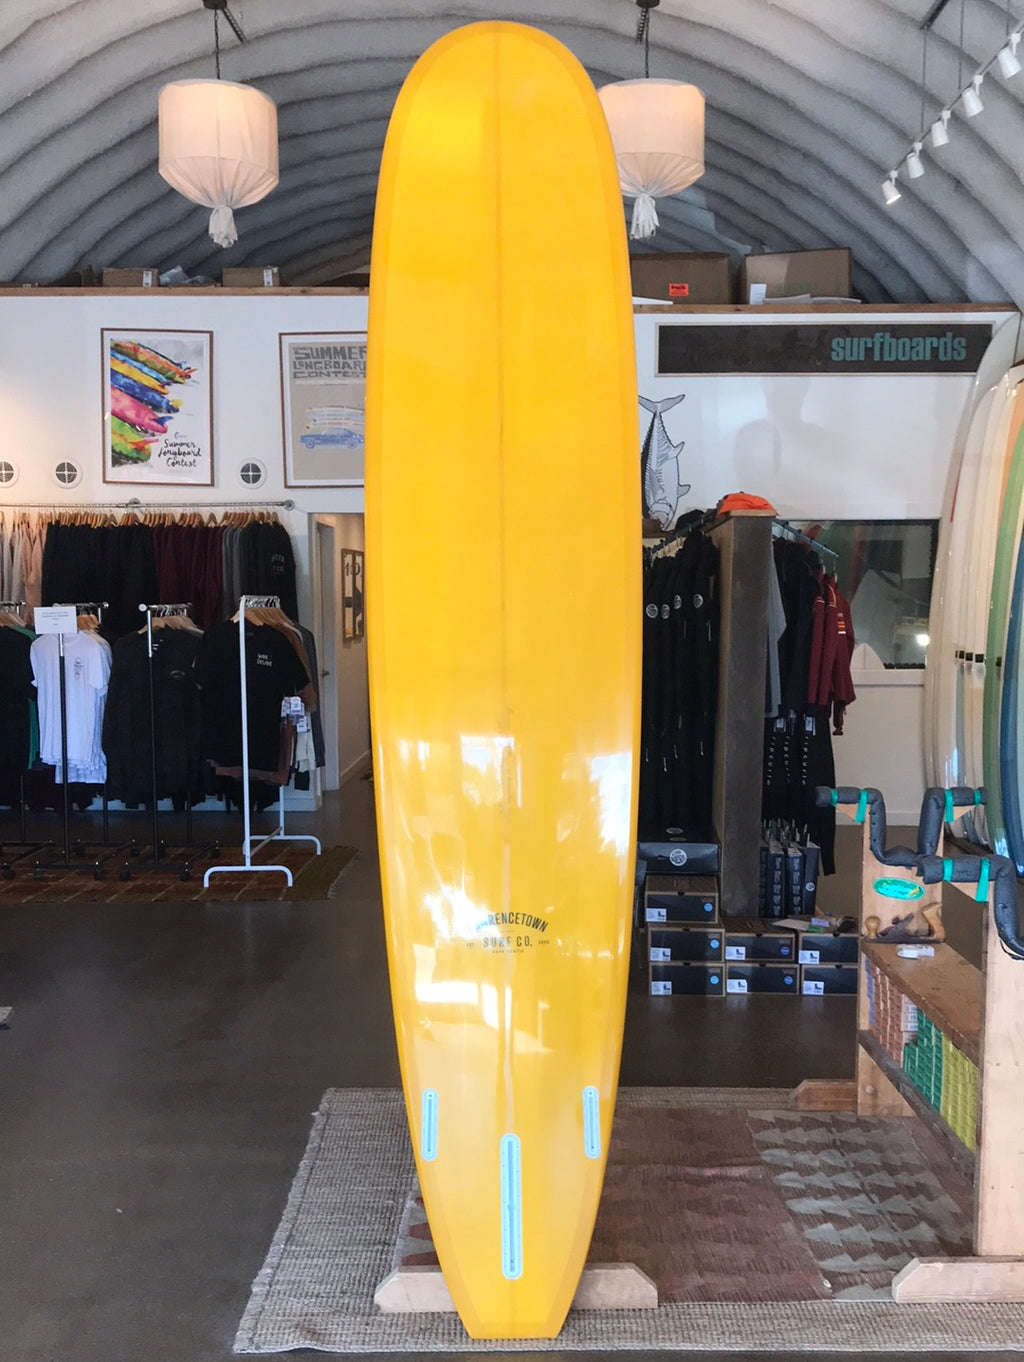 Lawrencetown Surf Co. - 9'2 Performance Nose Rider